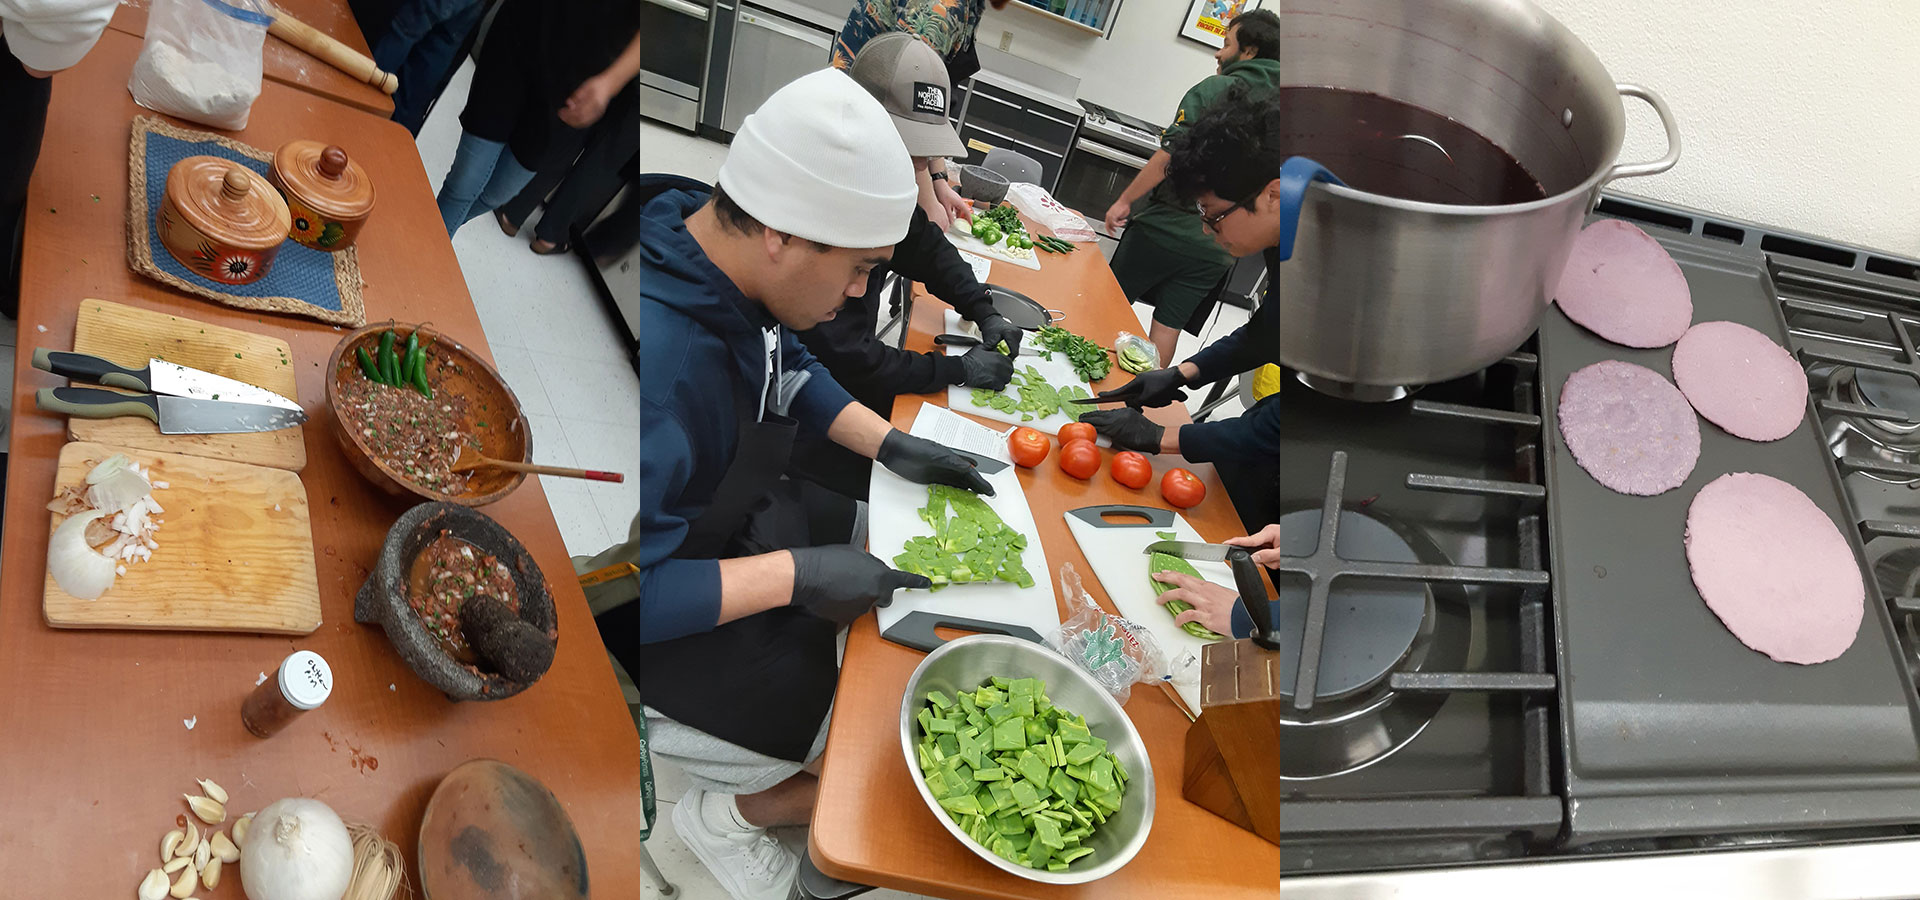 A montage of three photos showing students cooking